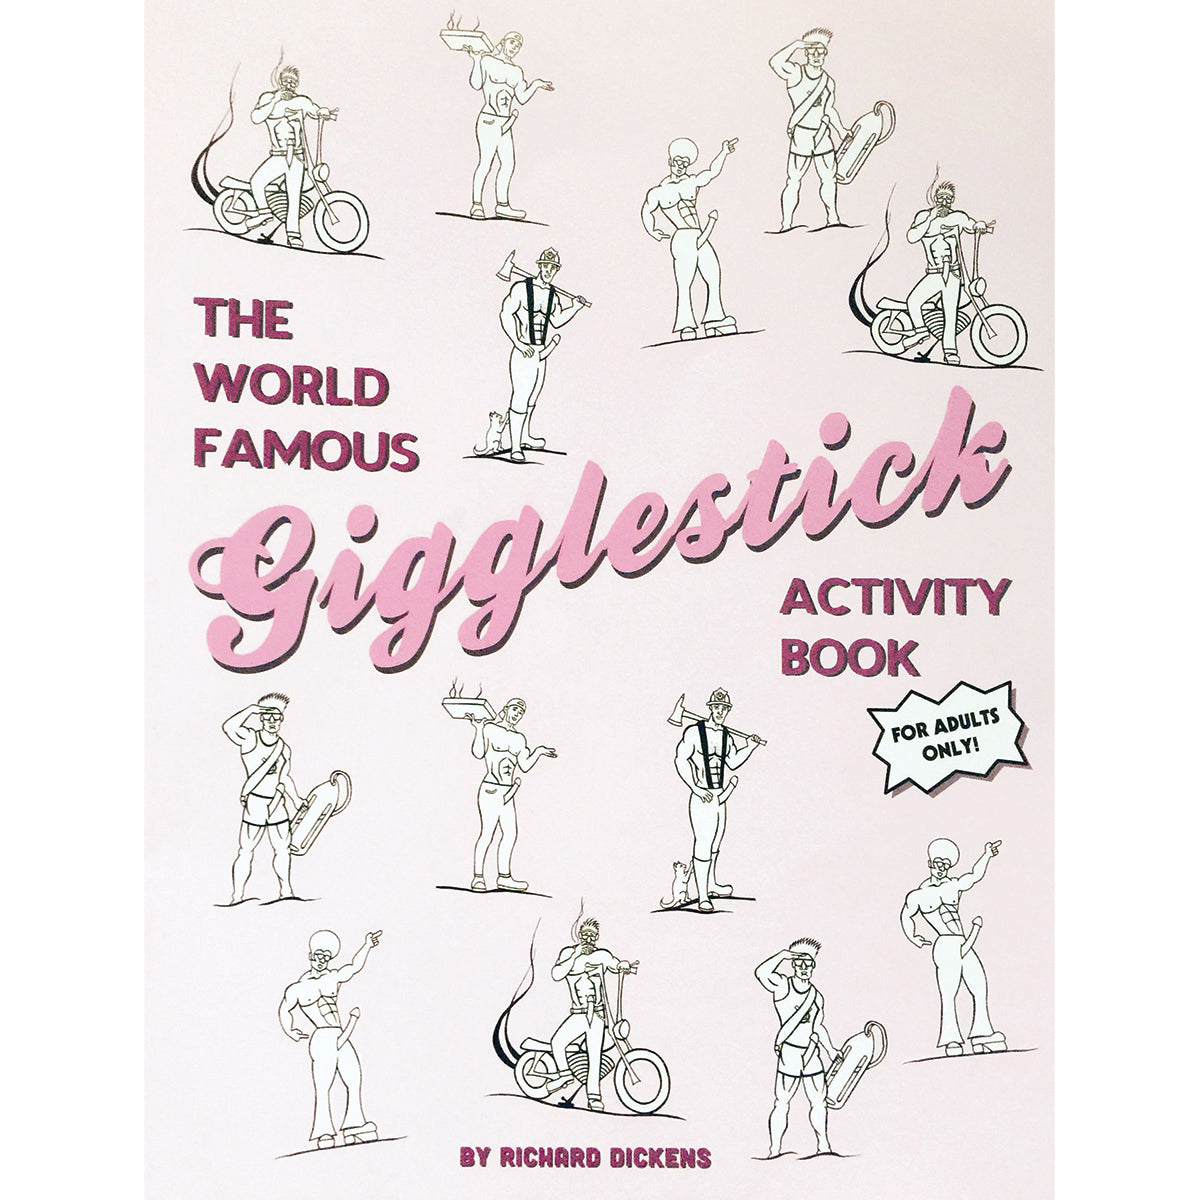 Wood Rocket World Famous Gigglestick Activity Book